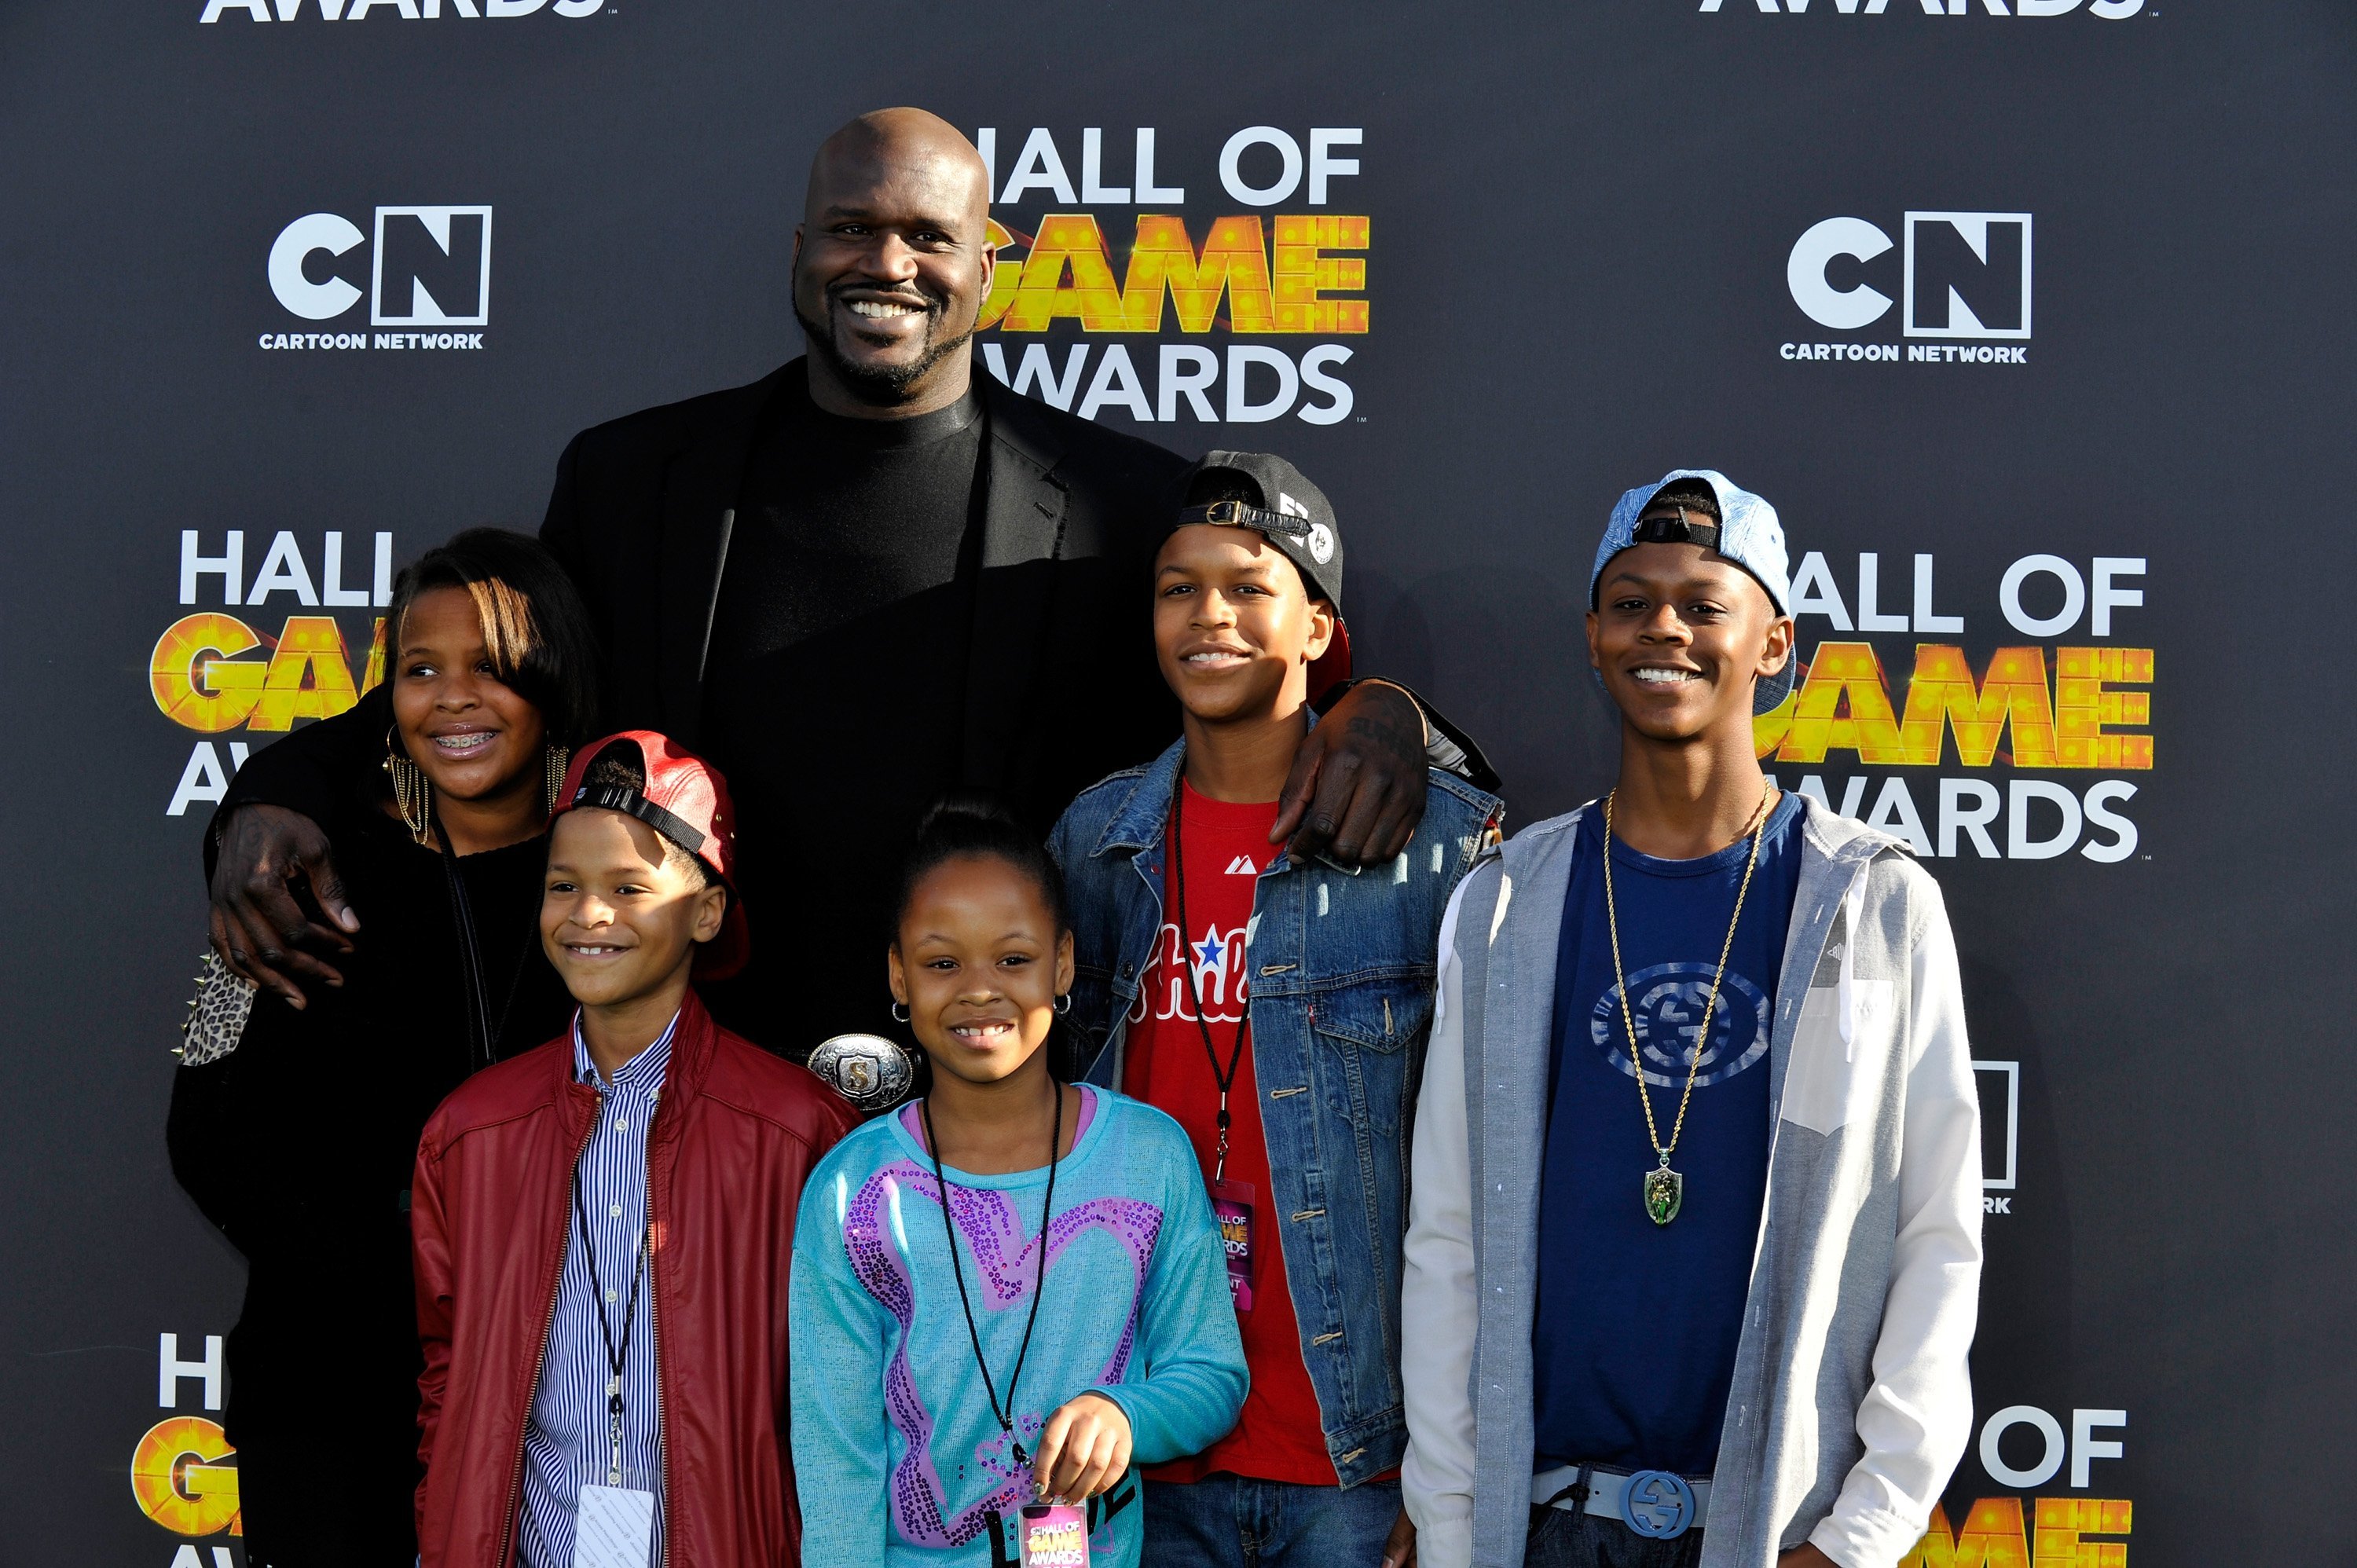 Taahirah, Shaquille, Shareef, Me'arah, Shaqir, and Myles O'Neal at the Third Annual Hall of Game Awards | Photo: Getty Images